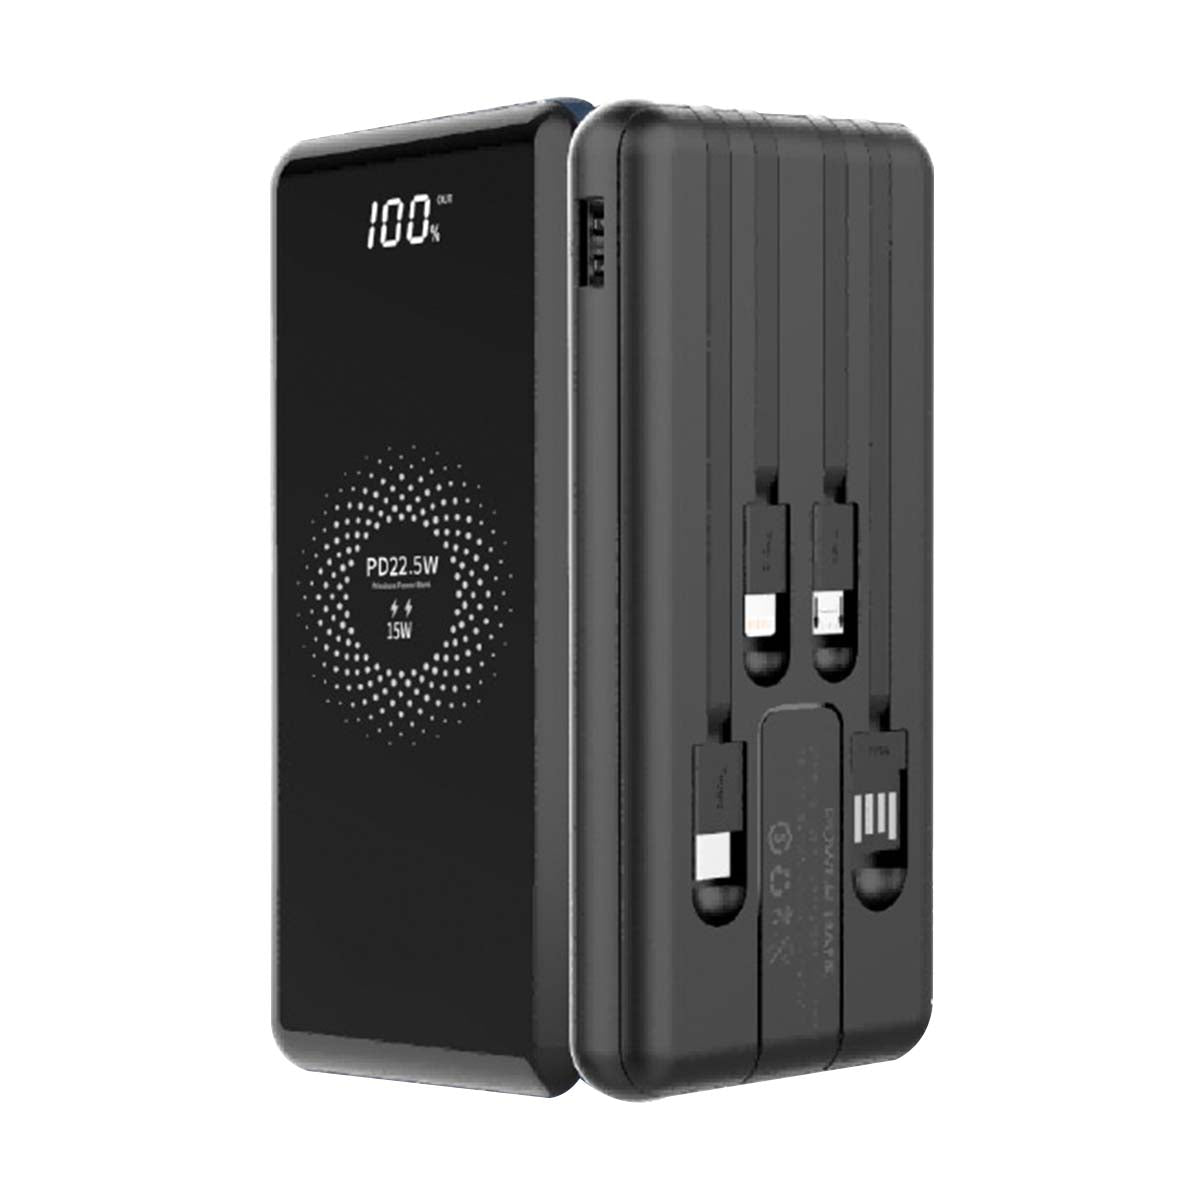 Multi Cable Power Bank, Airline Approved Power Bank, 10000mAh Power Bank with 4 Built in Cables